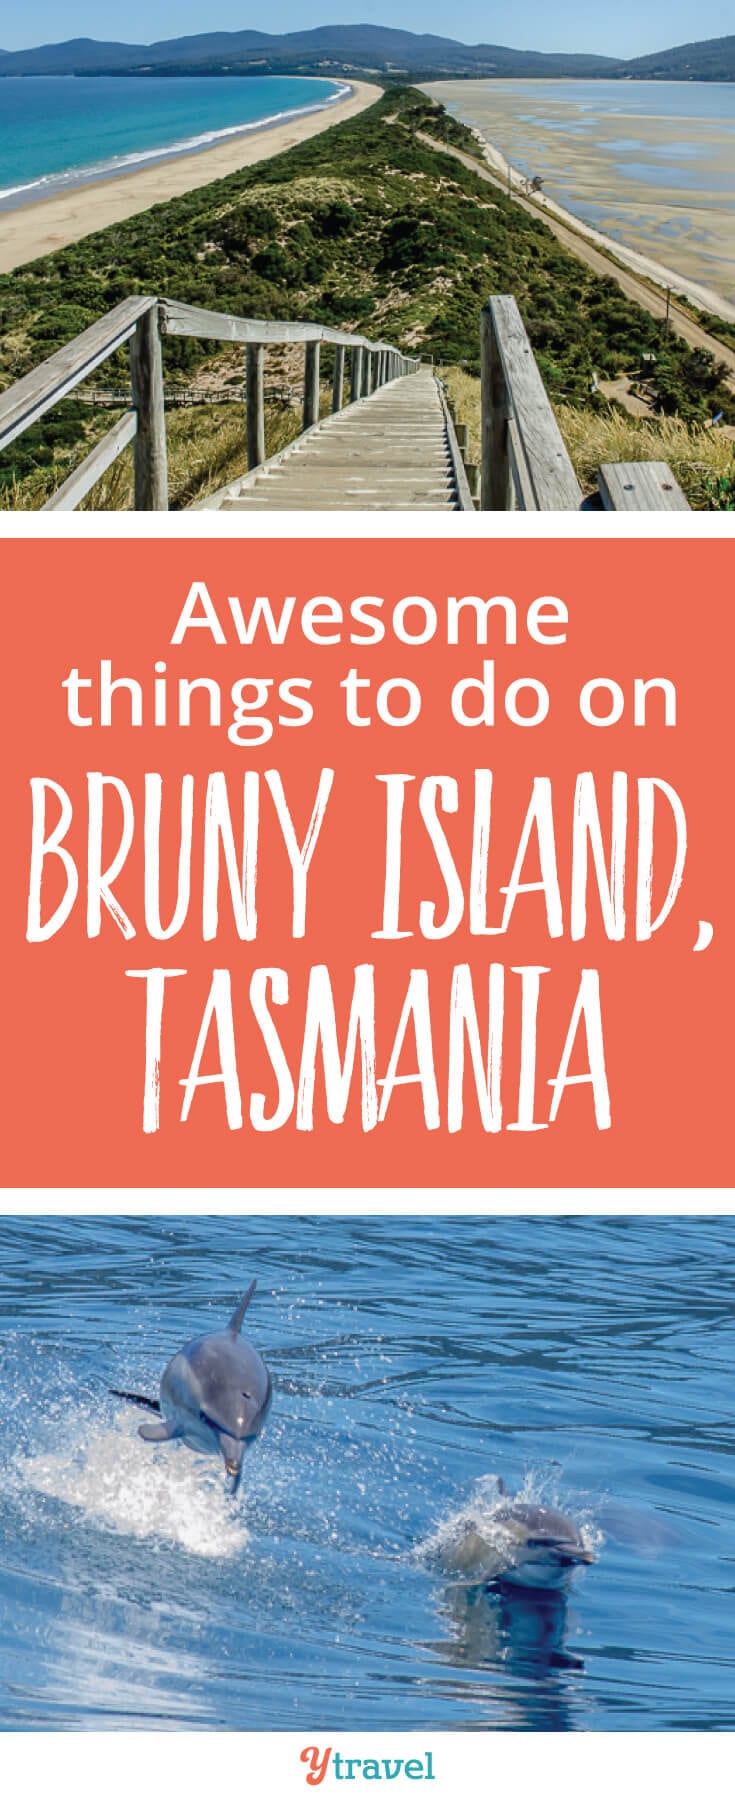 Looking for awesome things to do in bruny island tasmania? Check out the amazing beaches, wildlife, and parks!